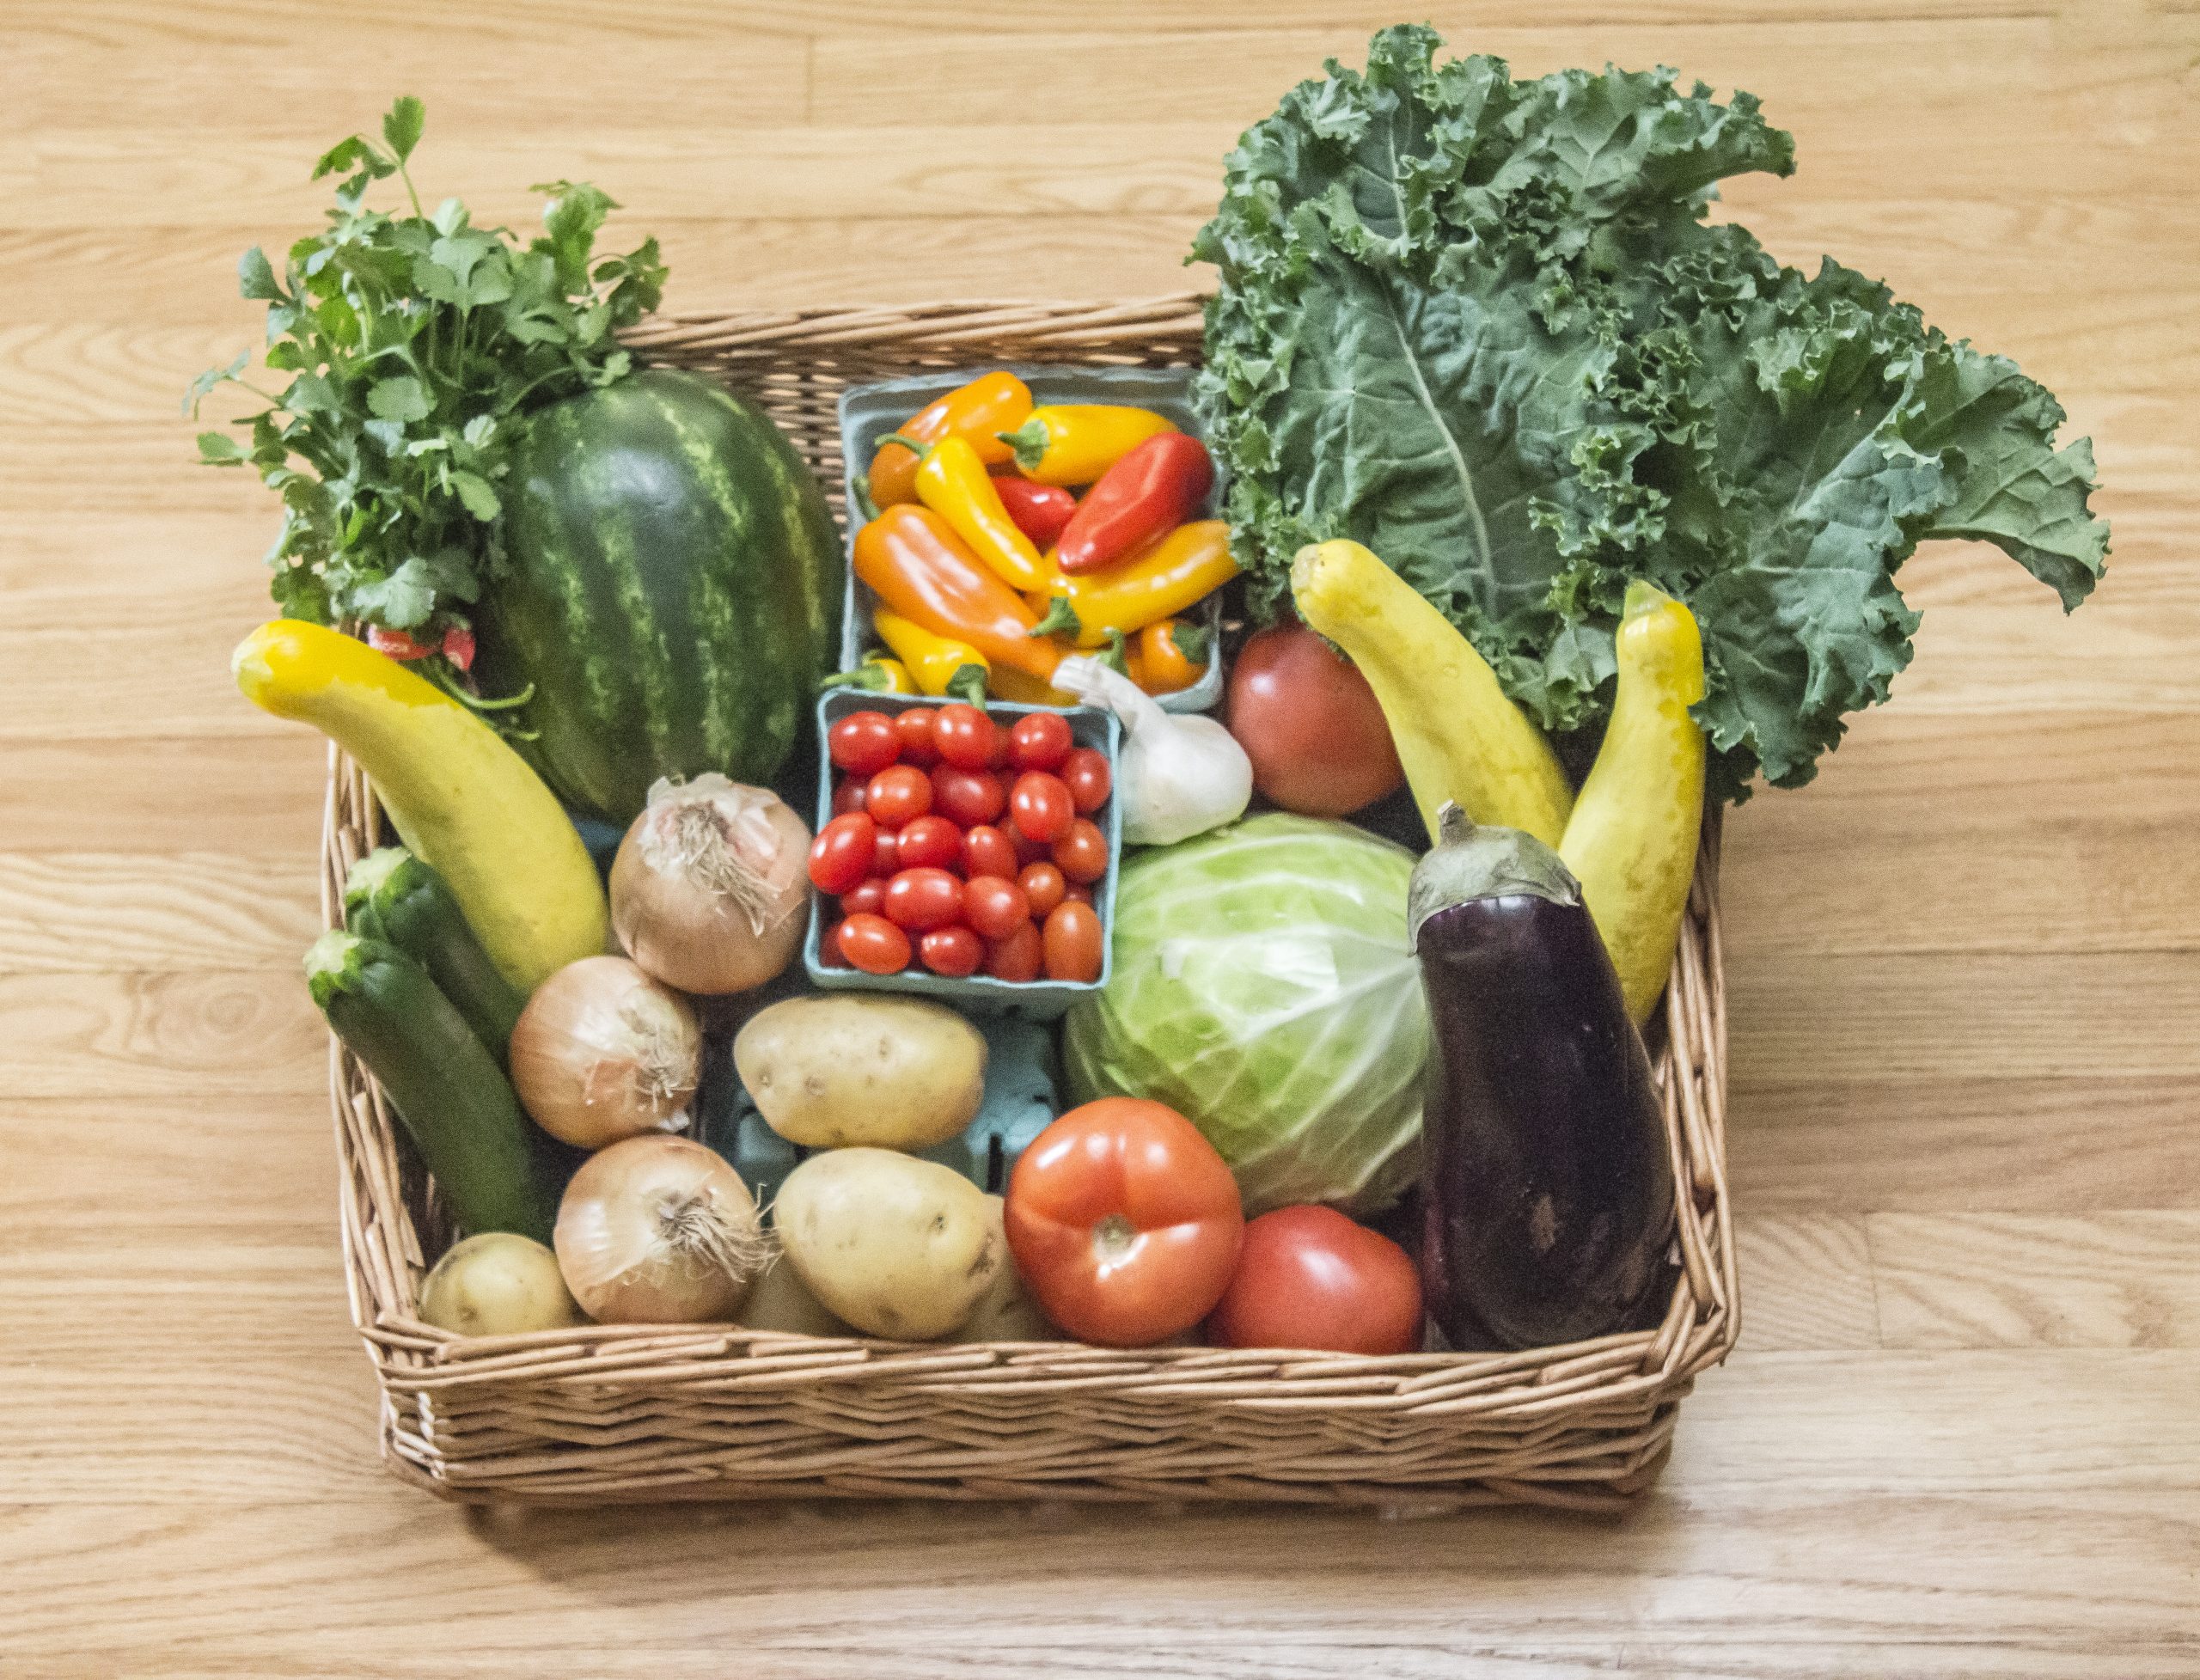 A full Rootbound CSA box with a variety of 7-10 kinds of vegetables.